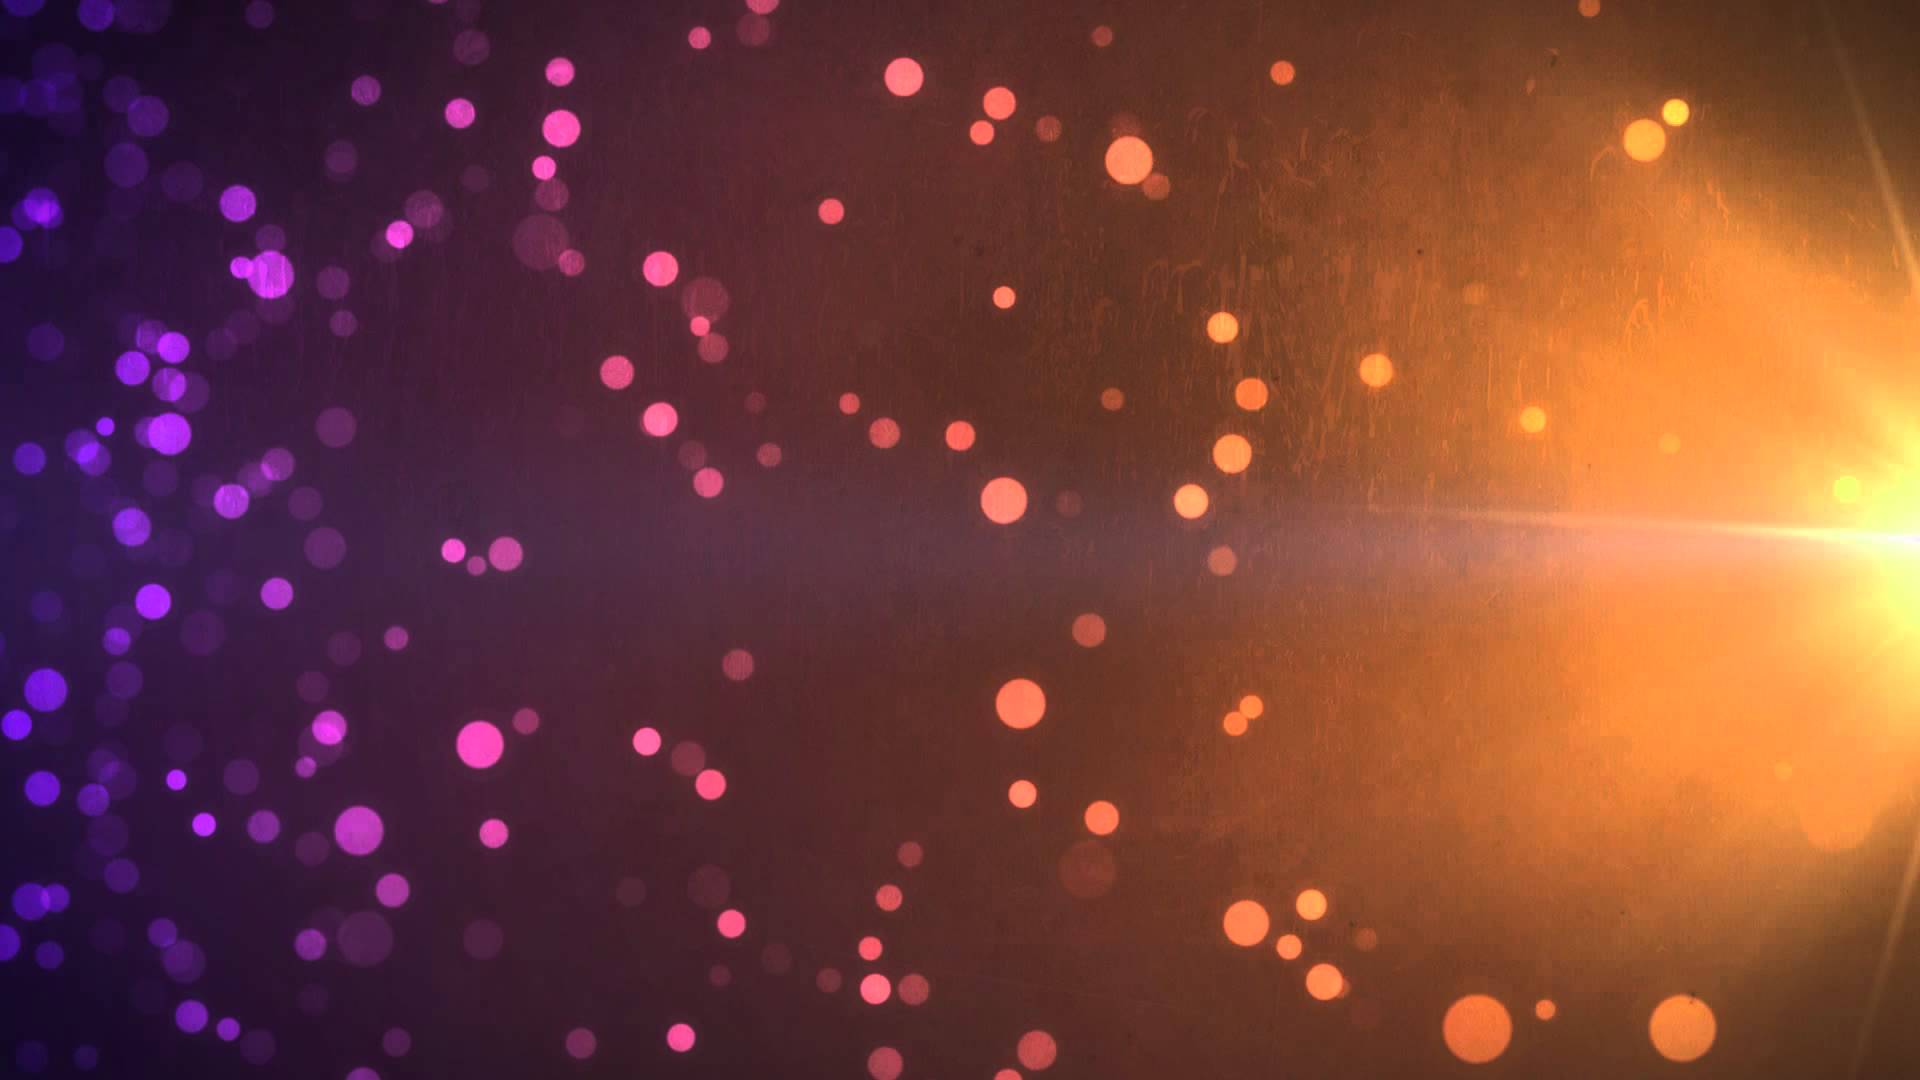 FREE MOTION BACKGROUND - Open Space - YouTube